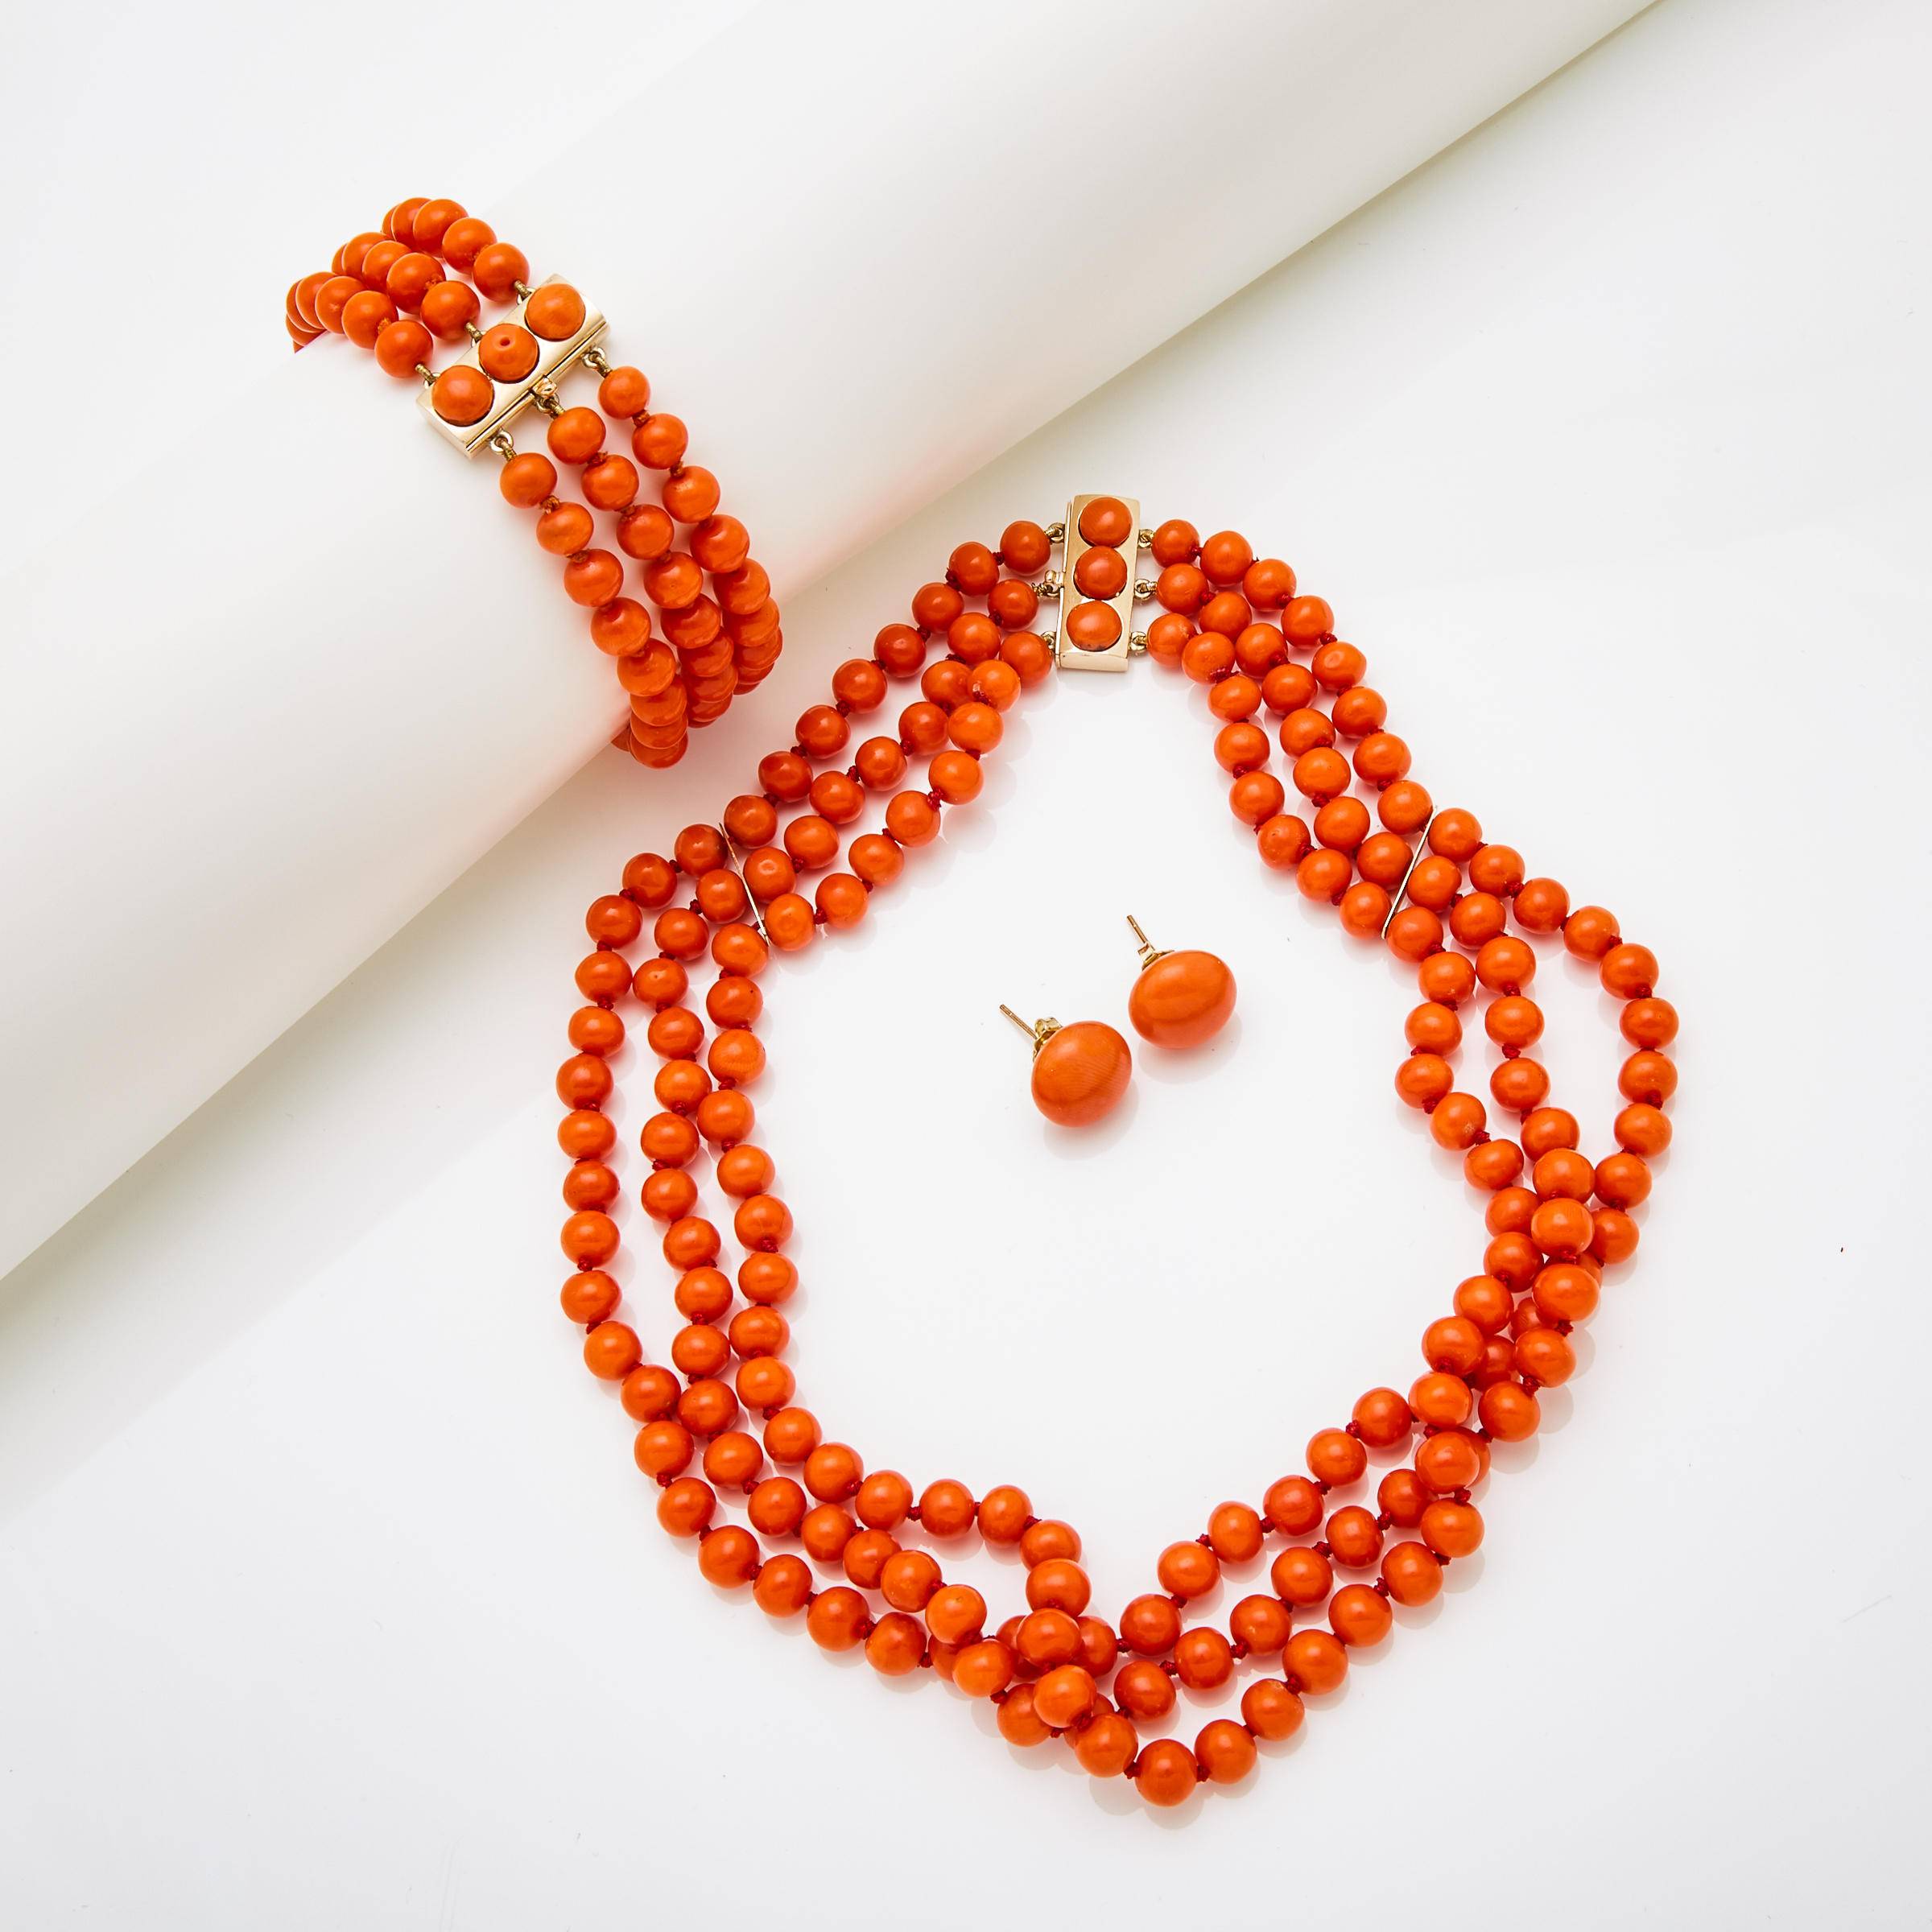 Triple Strand Coral Bead Necklace And Bracelet